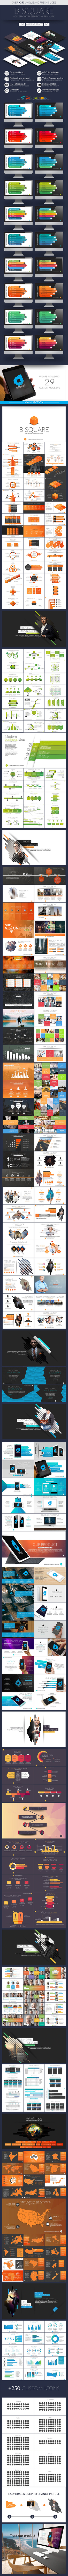 B Square Powerpoint Presentation Template